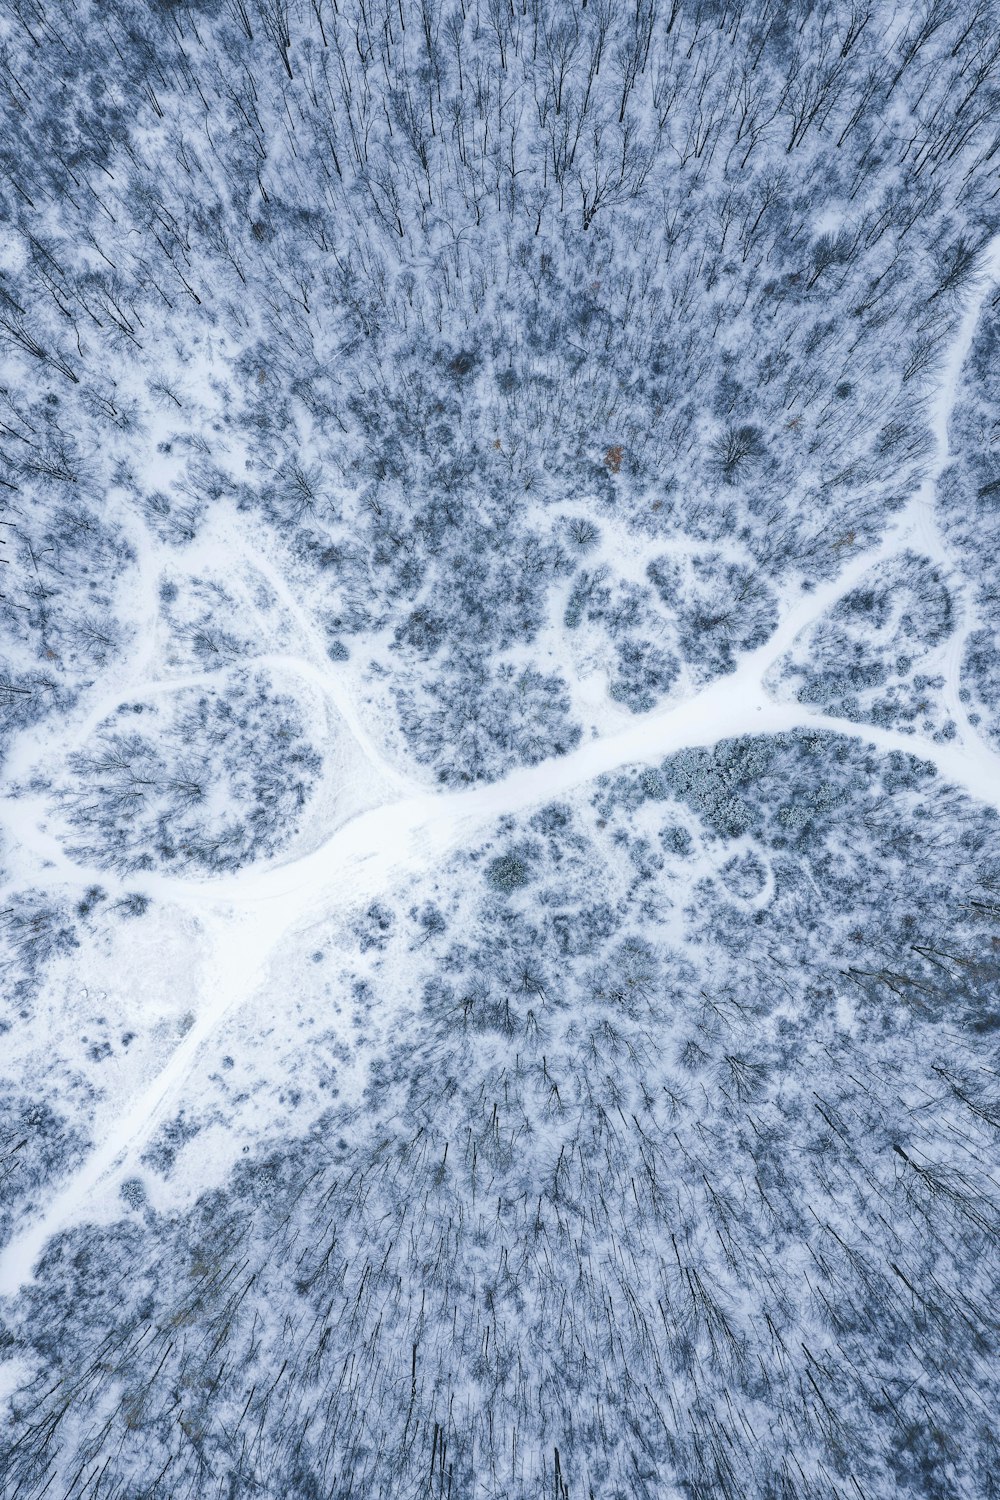 road and trees covered by snow